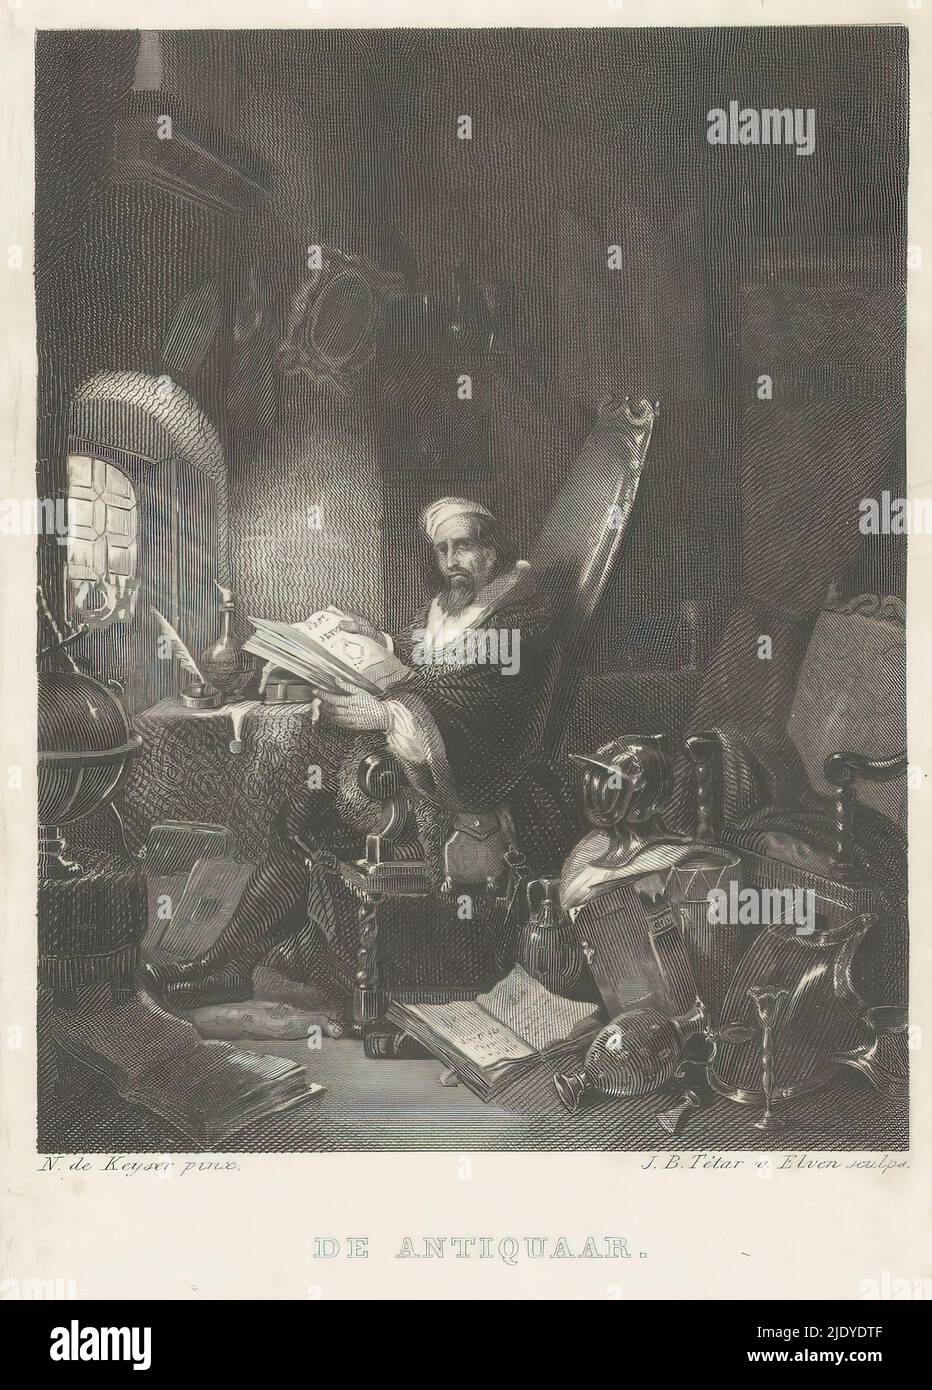 The Antiquarian (title on object), A man with a book in his hands sits in a chair with a high back. Around him are curiosities including a suit of armor, shield and globe., print maker: Jan Baptist Tetar van Elven, (mentioned on object), after painting by: Nicaise De Keyser, (mentioned on object), 1849, height 125 mm × width 82 mm Stock Photo